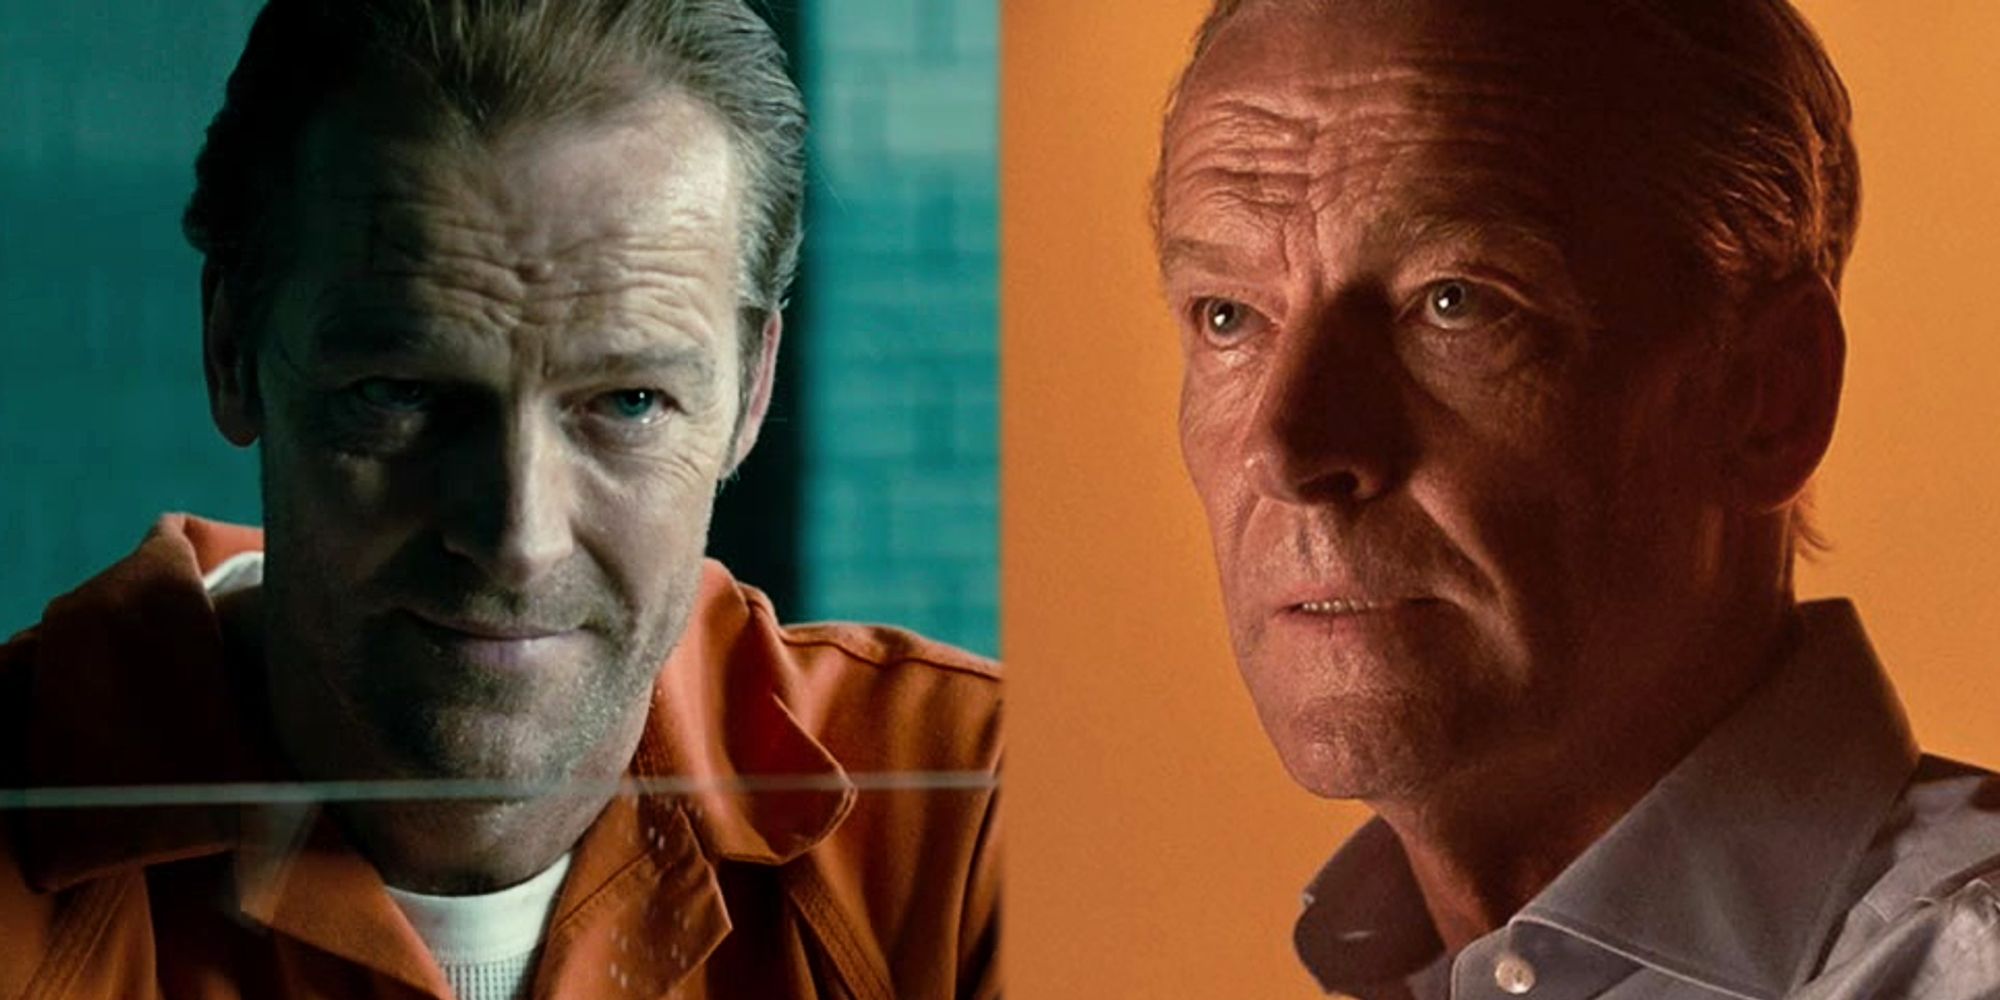 Iain Glen as Ralph D'Amico in Kick-Ass 2 and Bruce Wayne in Titans